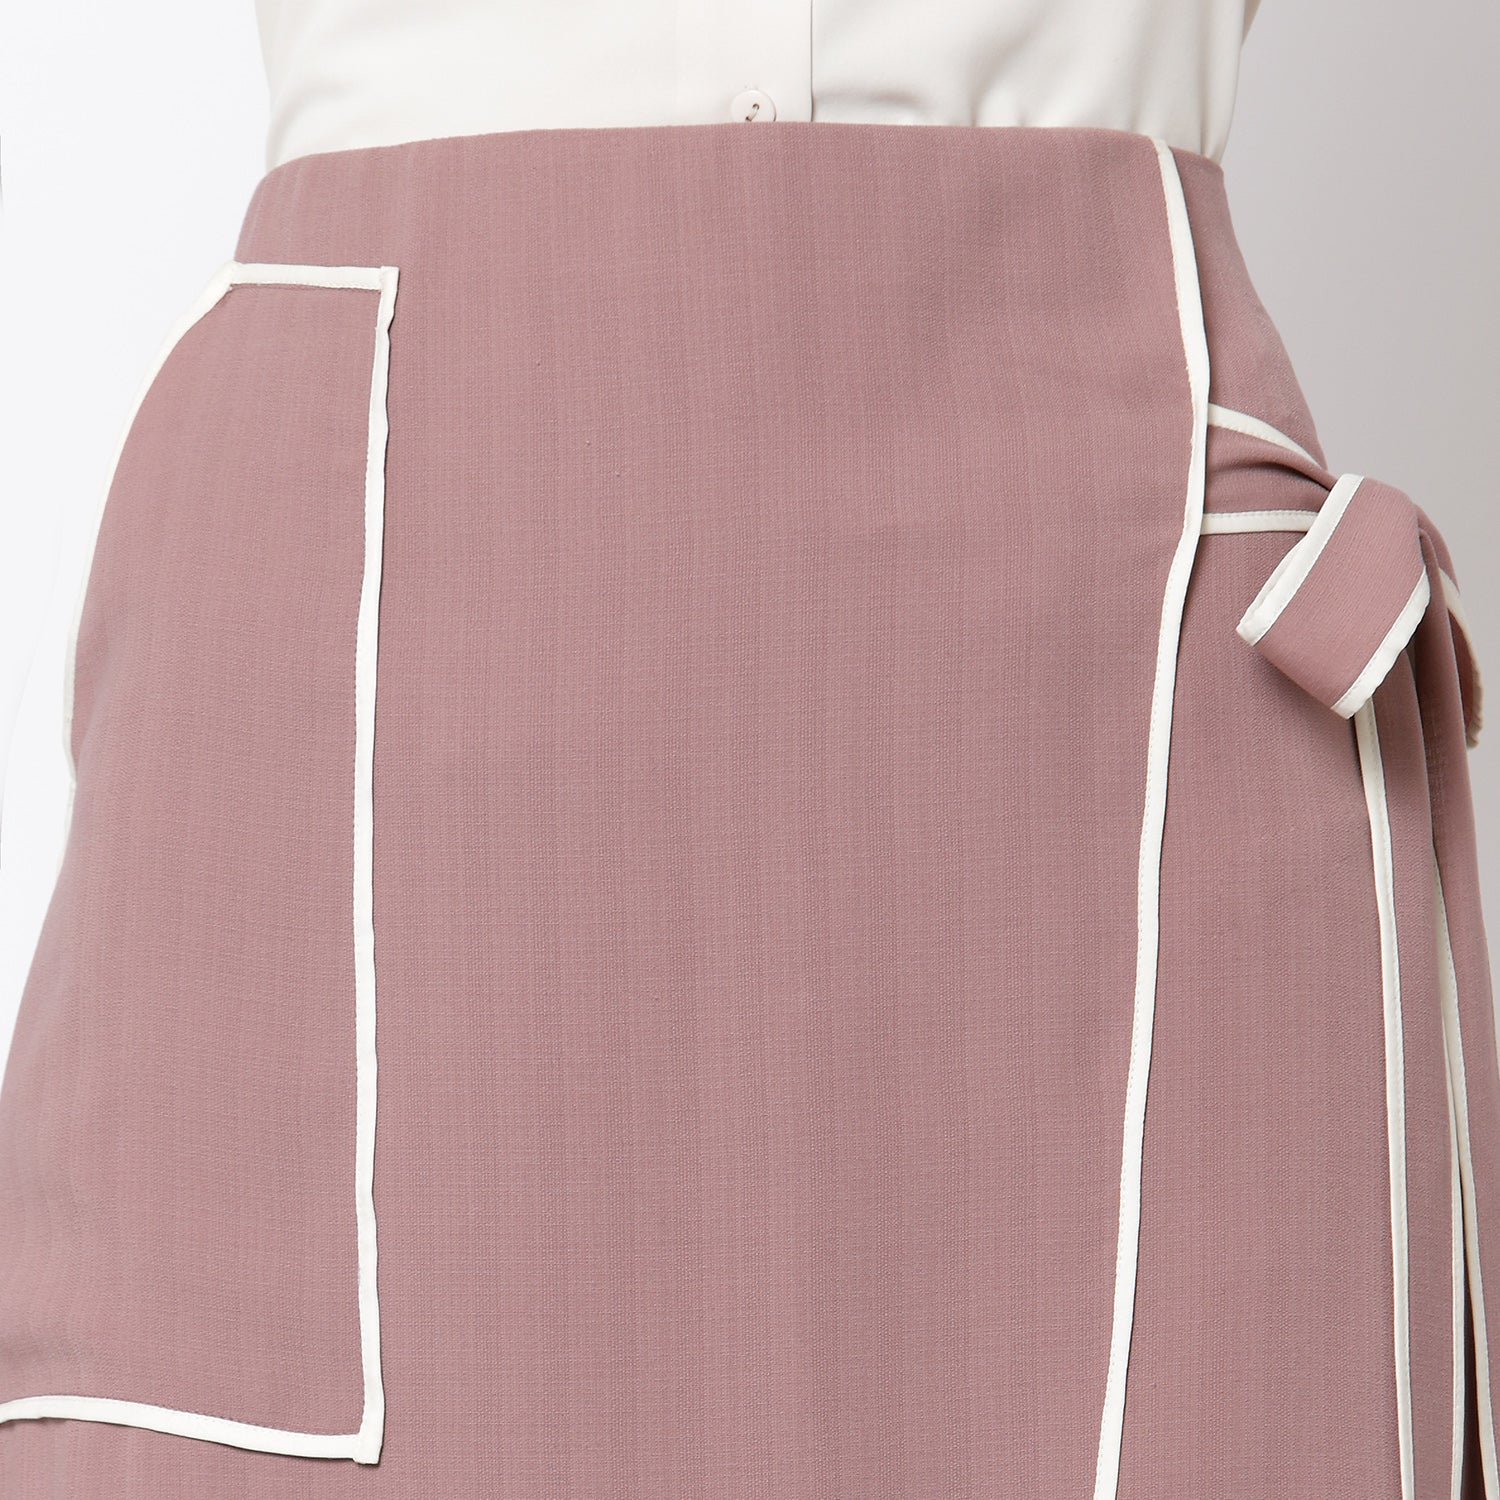 Pink assymetrical skirt with off white piping